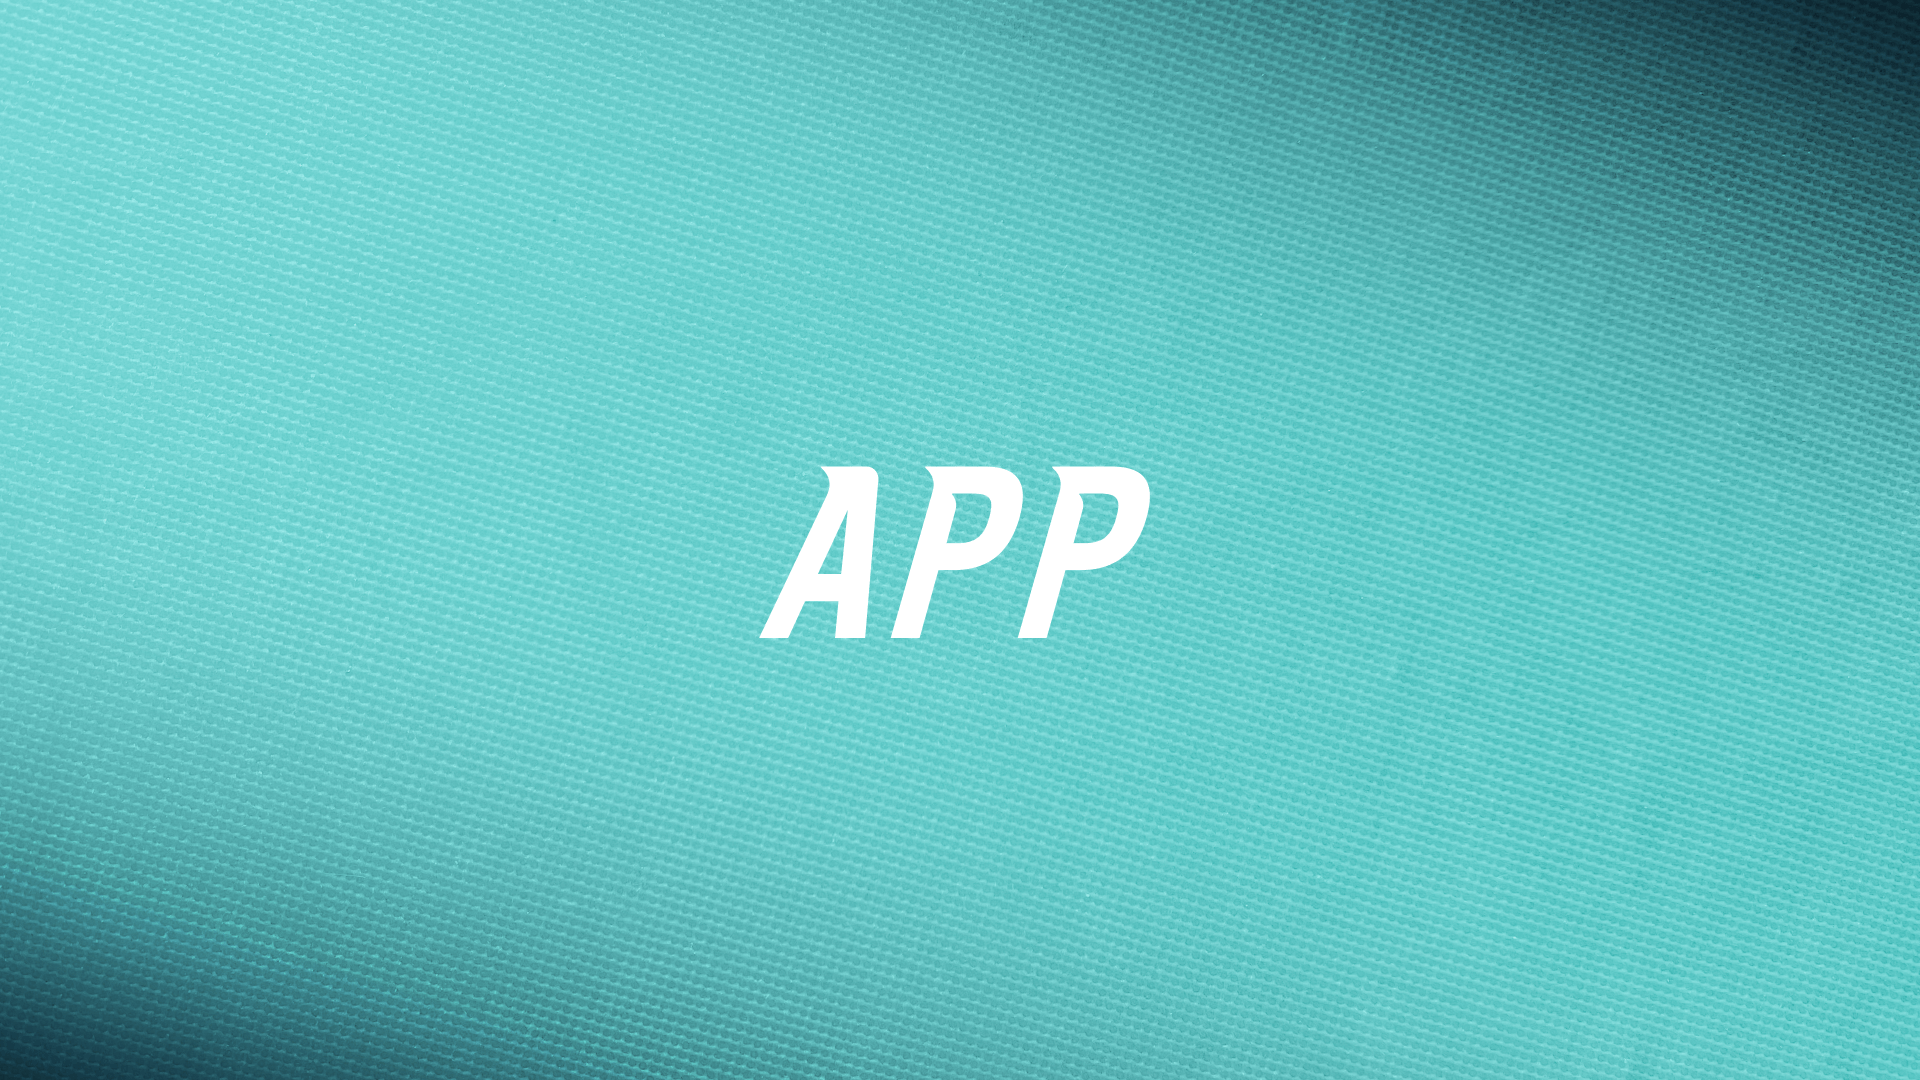 A graphic with the text "App" on a teal background.